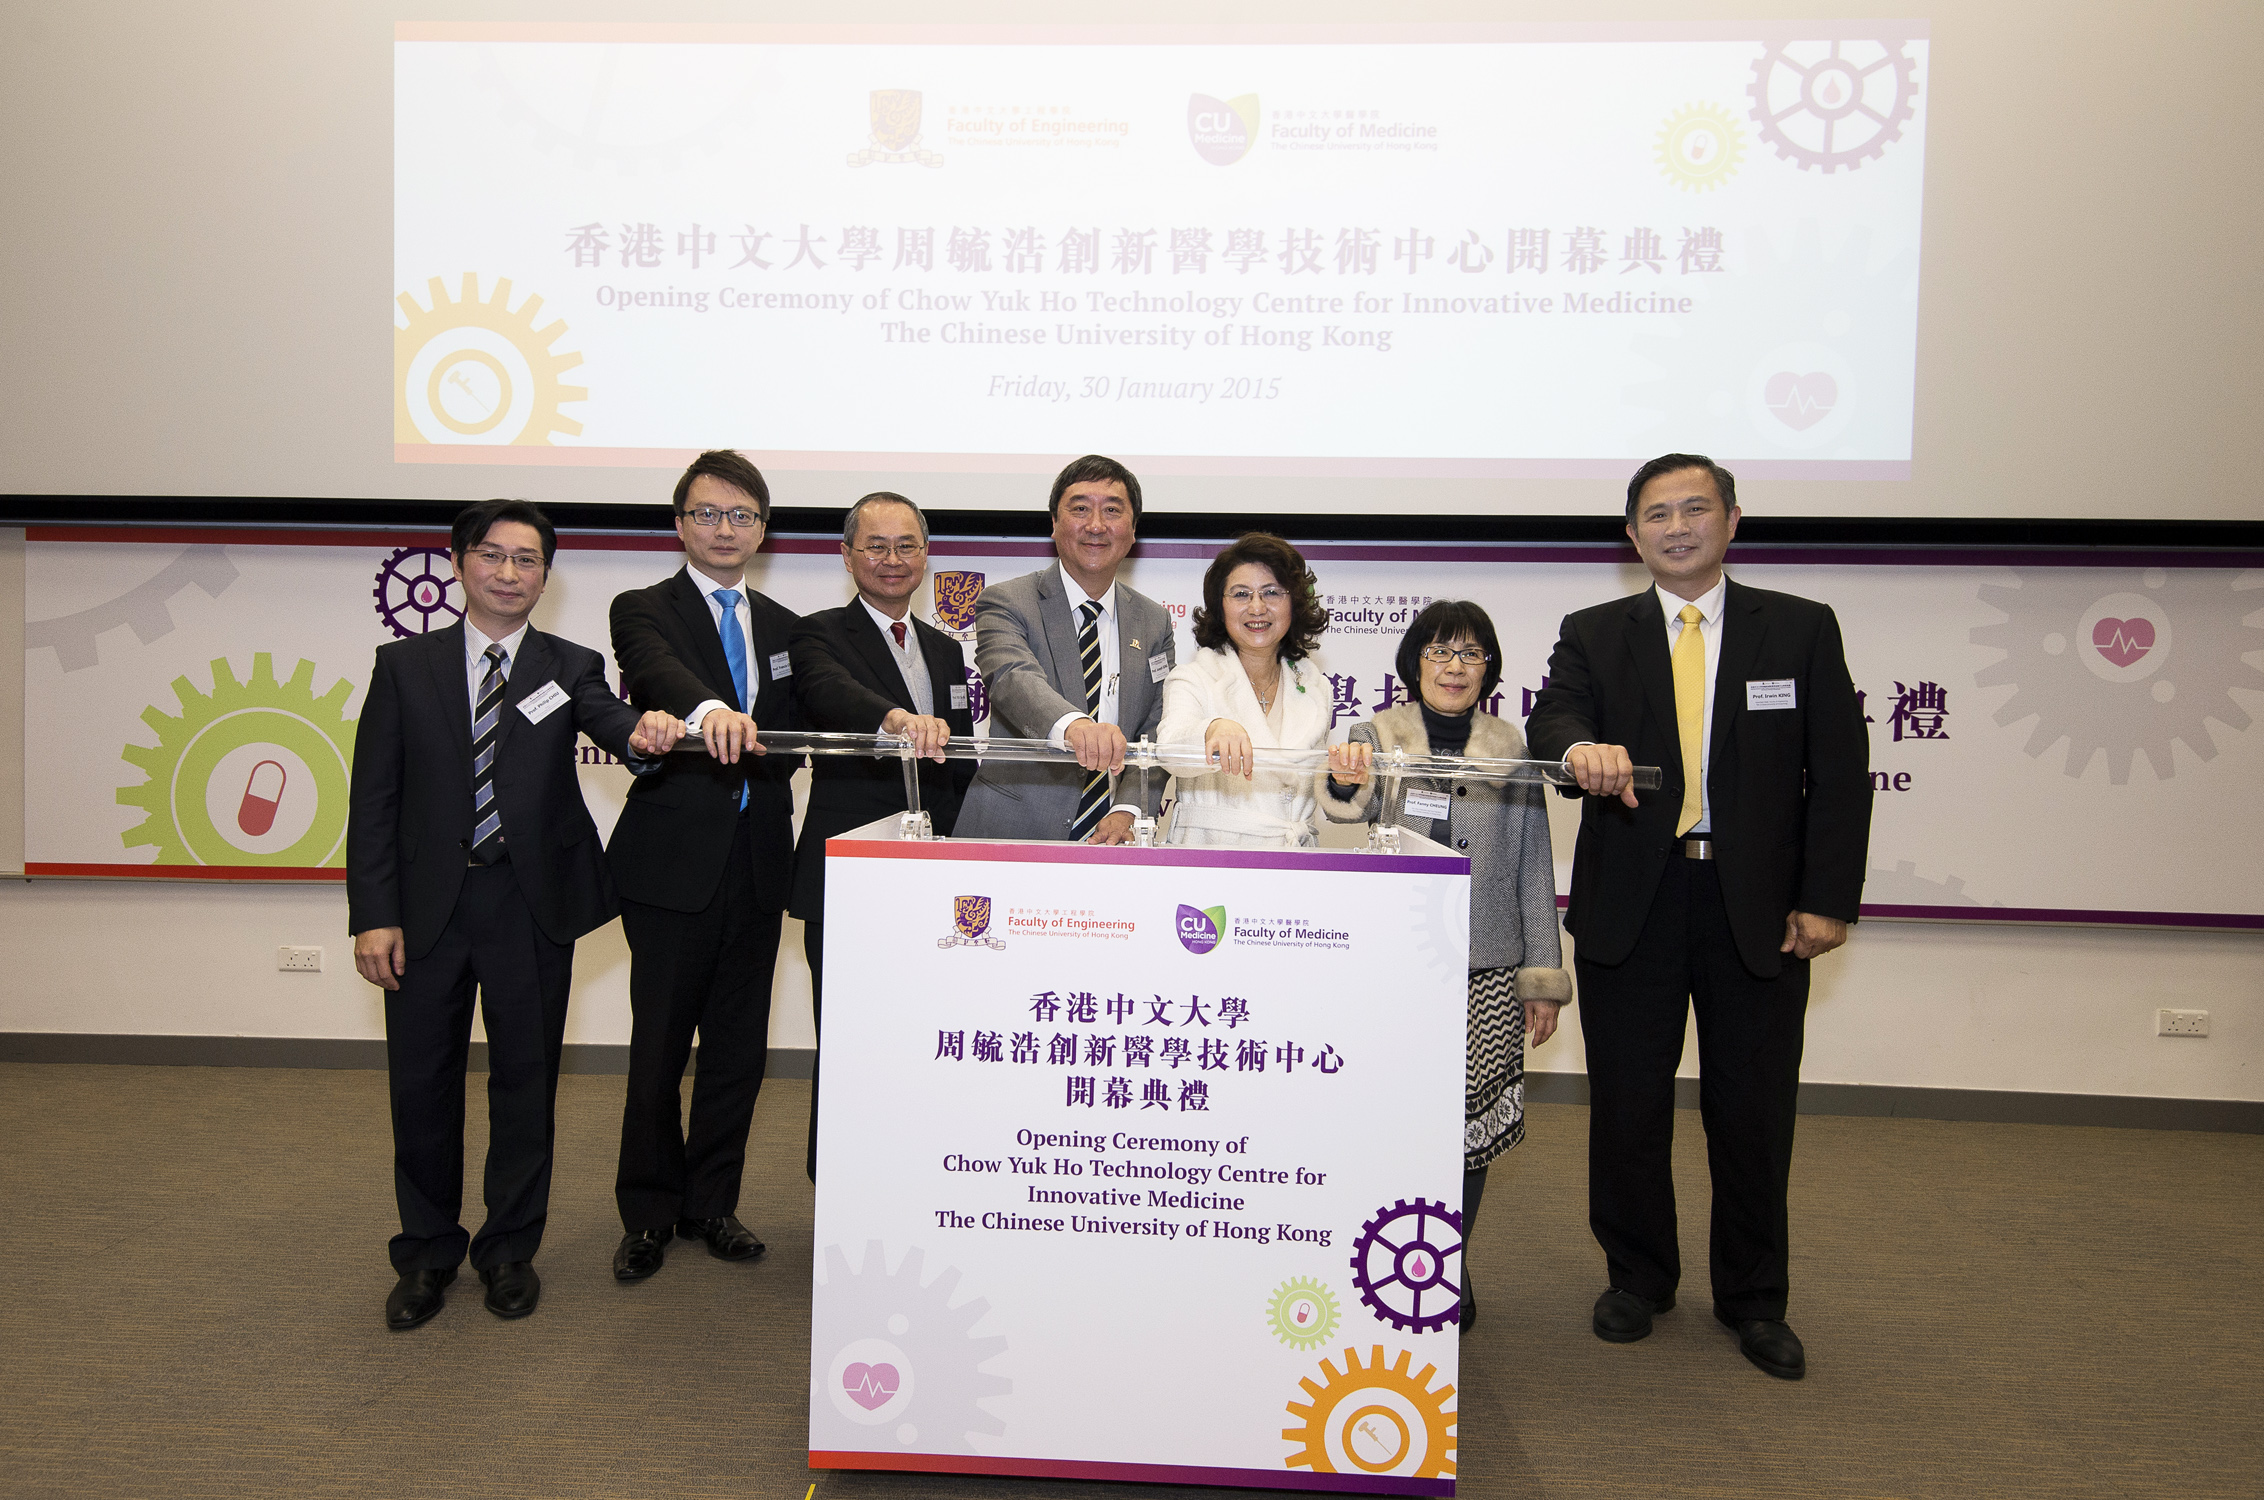 Prof. Philip W.Y. Chiu, Director of the Chow Yuk Ho Technology Centre for Innovative Medicine, CUHK